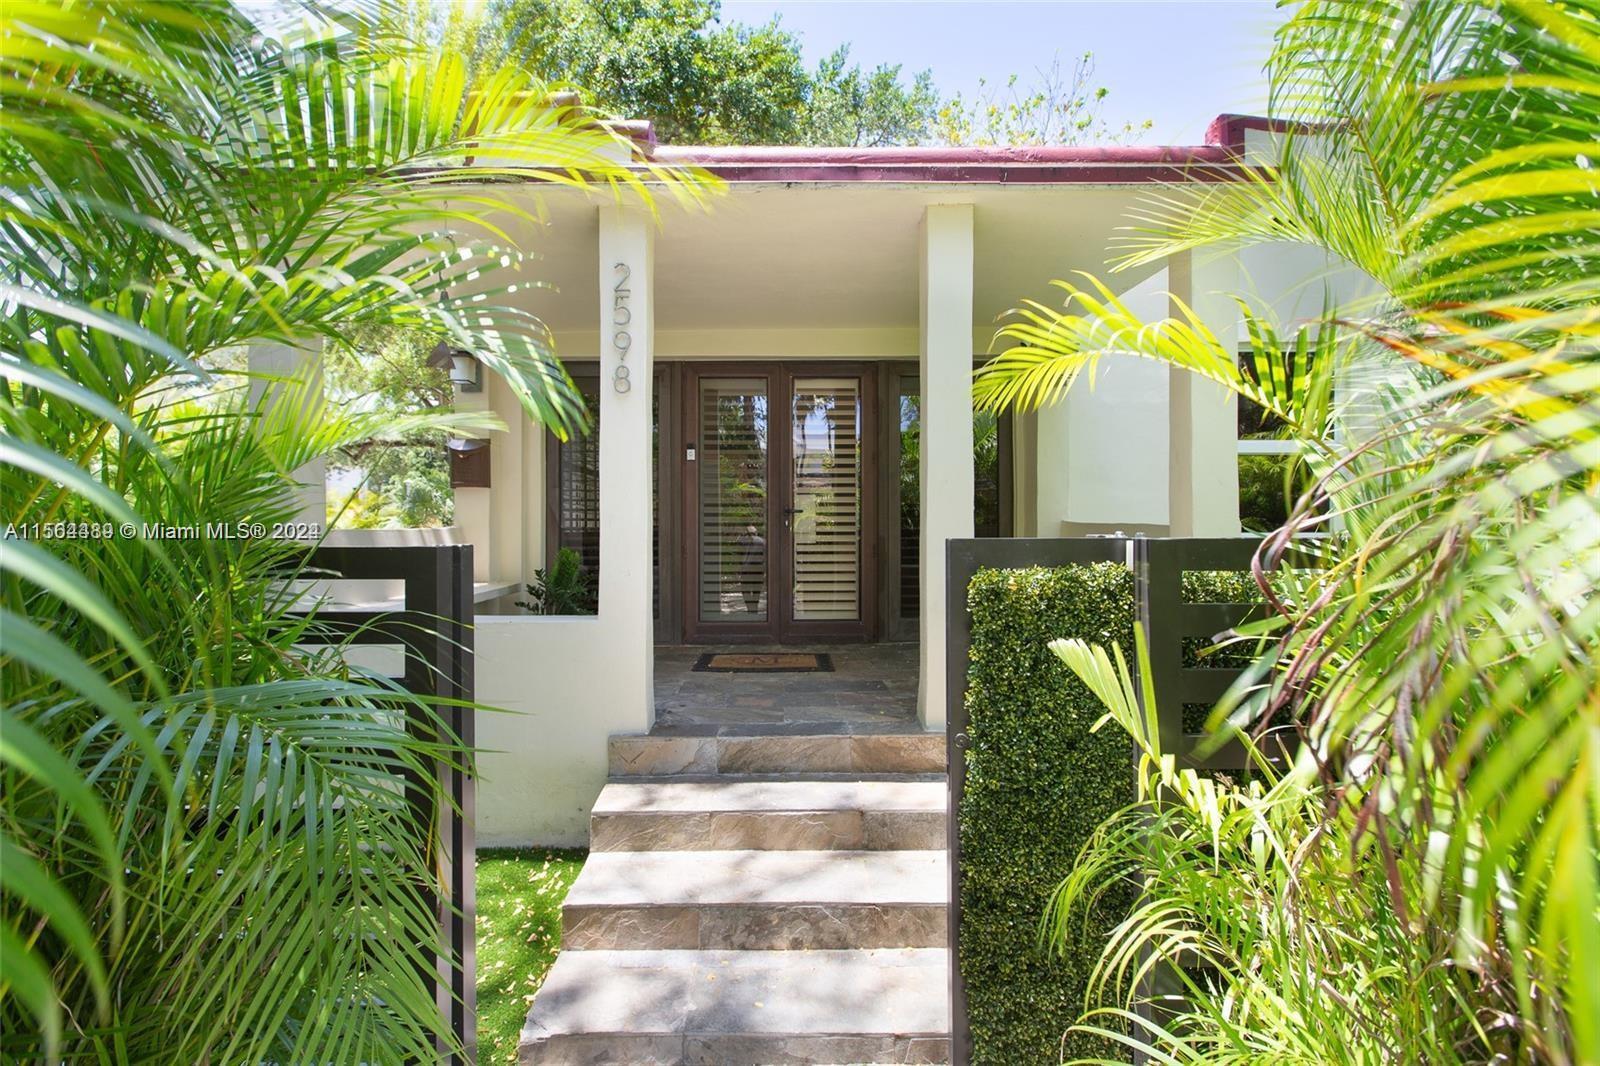 Stunning mid-century home on a tree-lined street in lush Coconut Grove. Major renovation including n